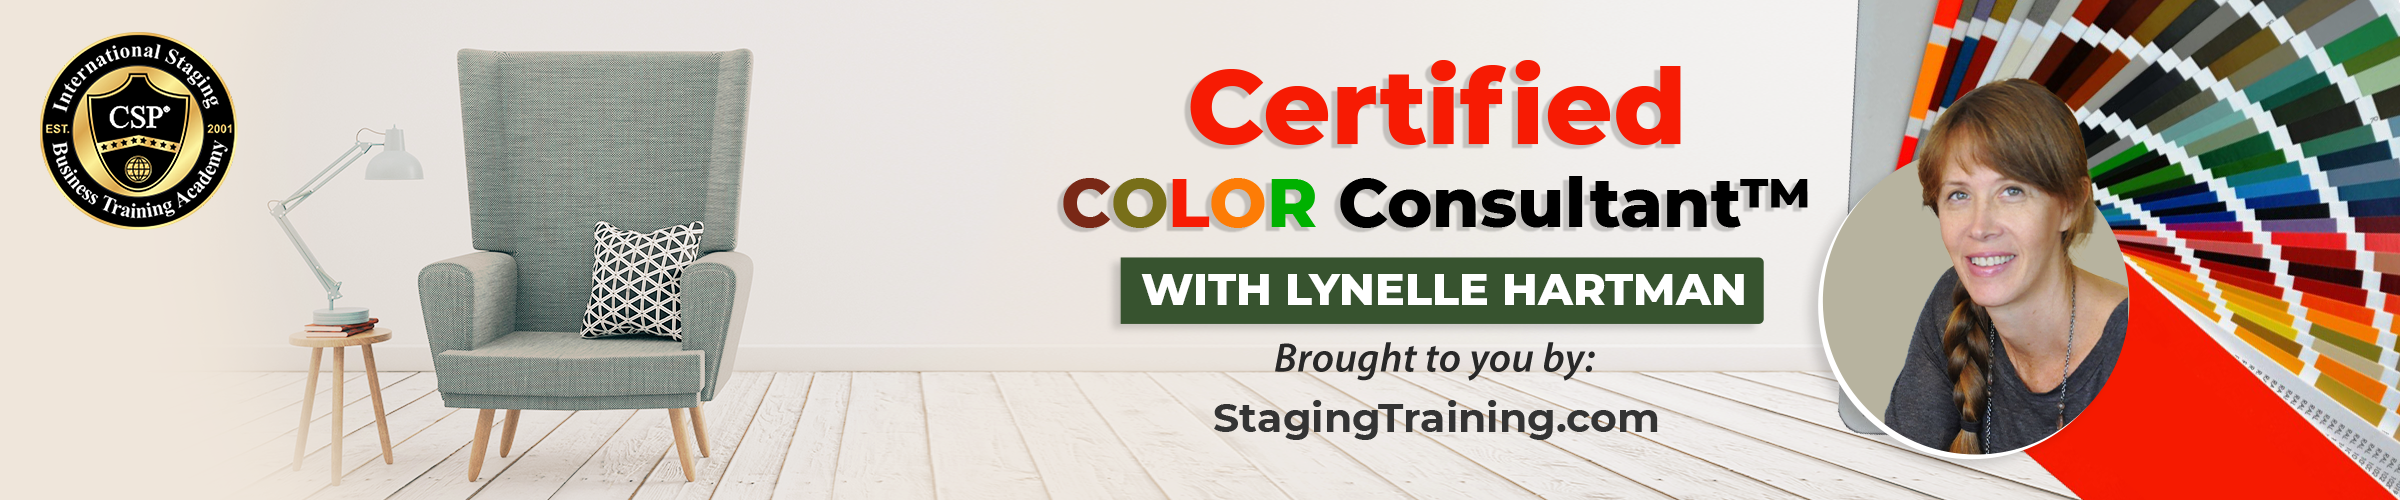 ccc certification banner